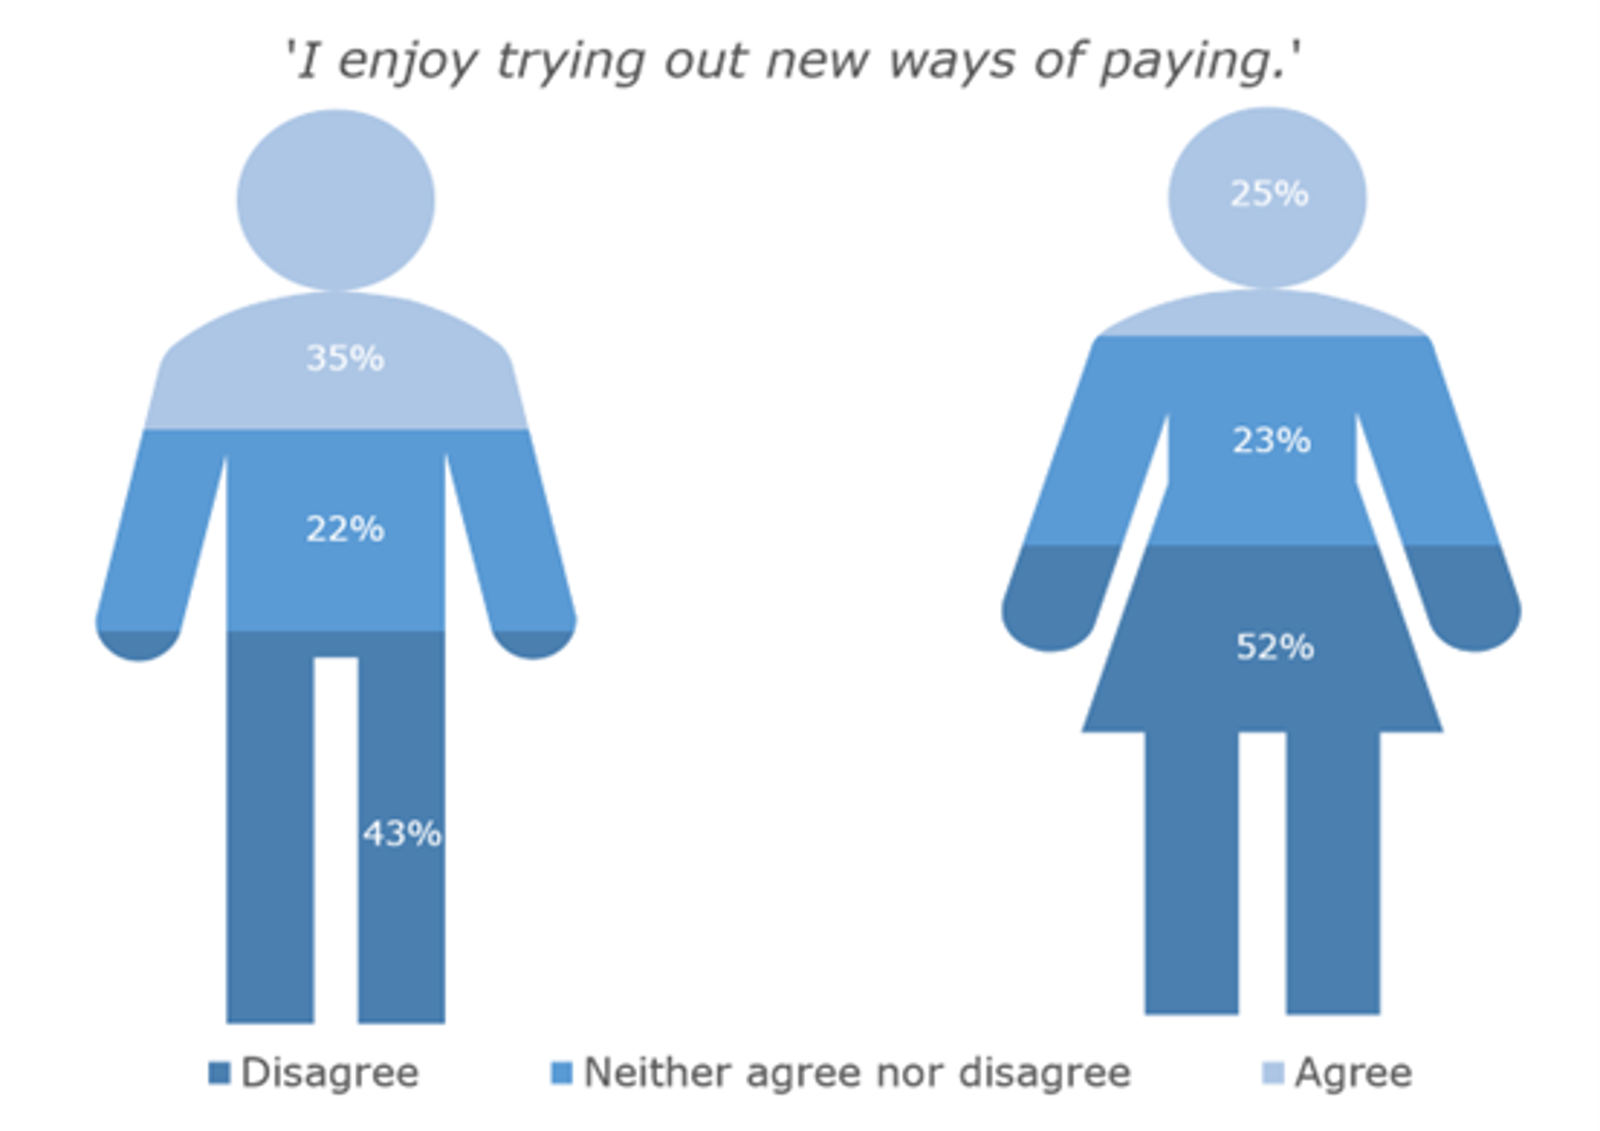 Figure 2. Men enjoy trying out new payment methods more